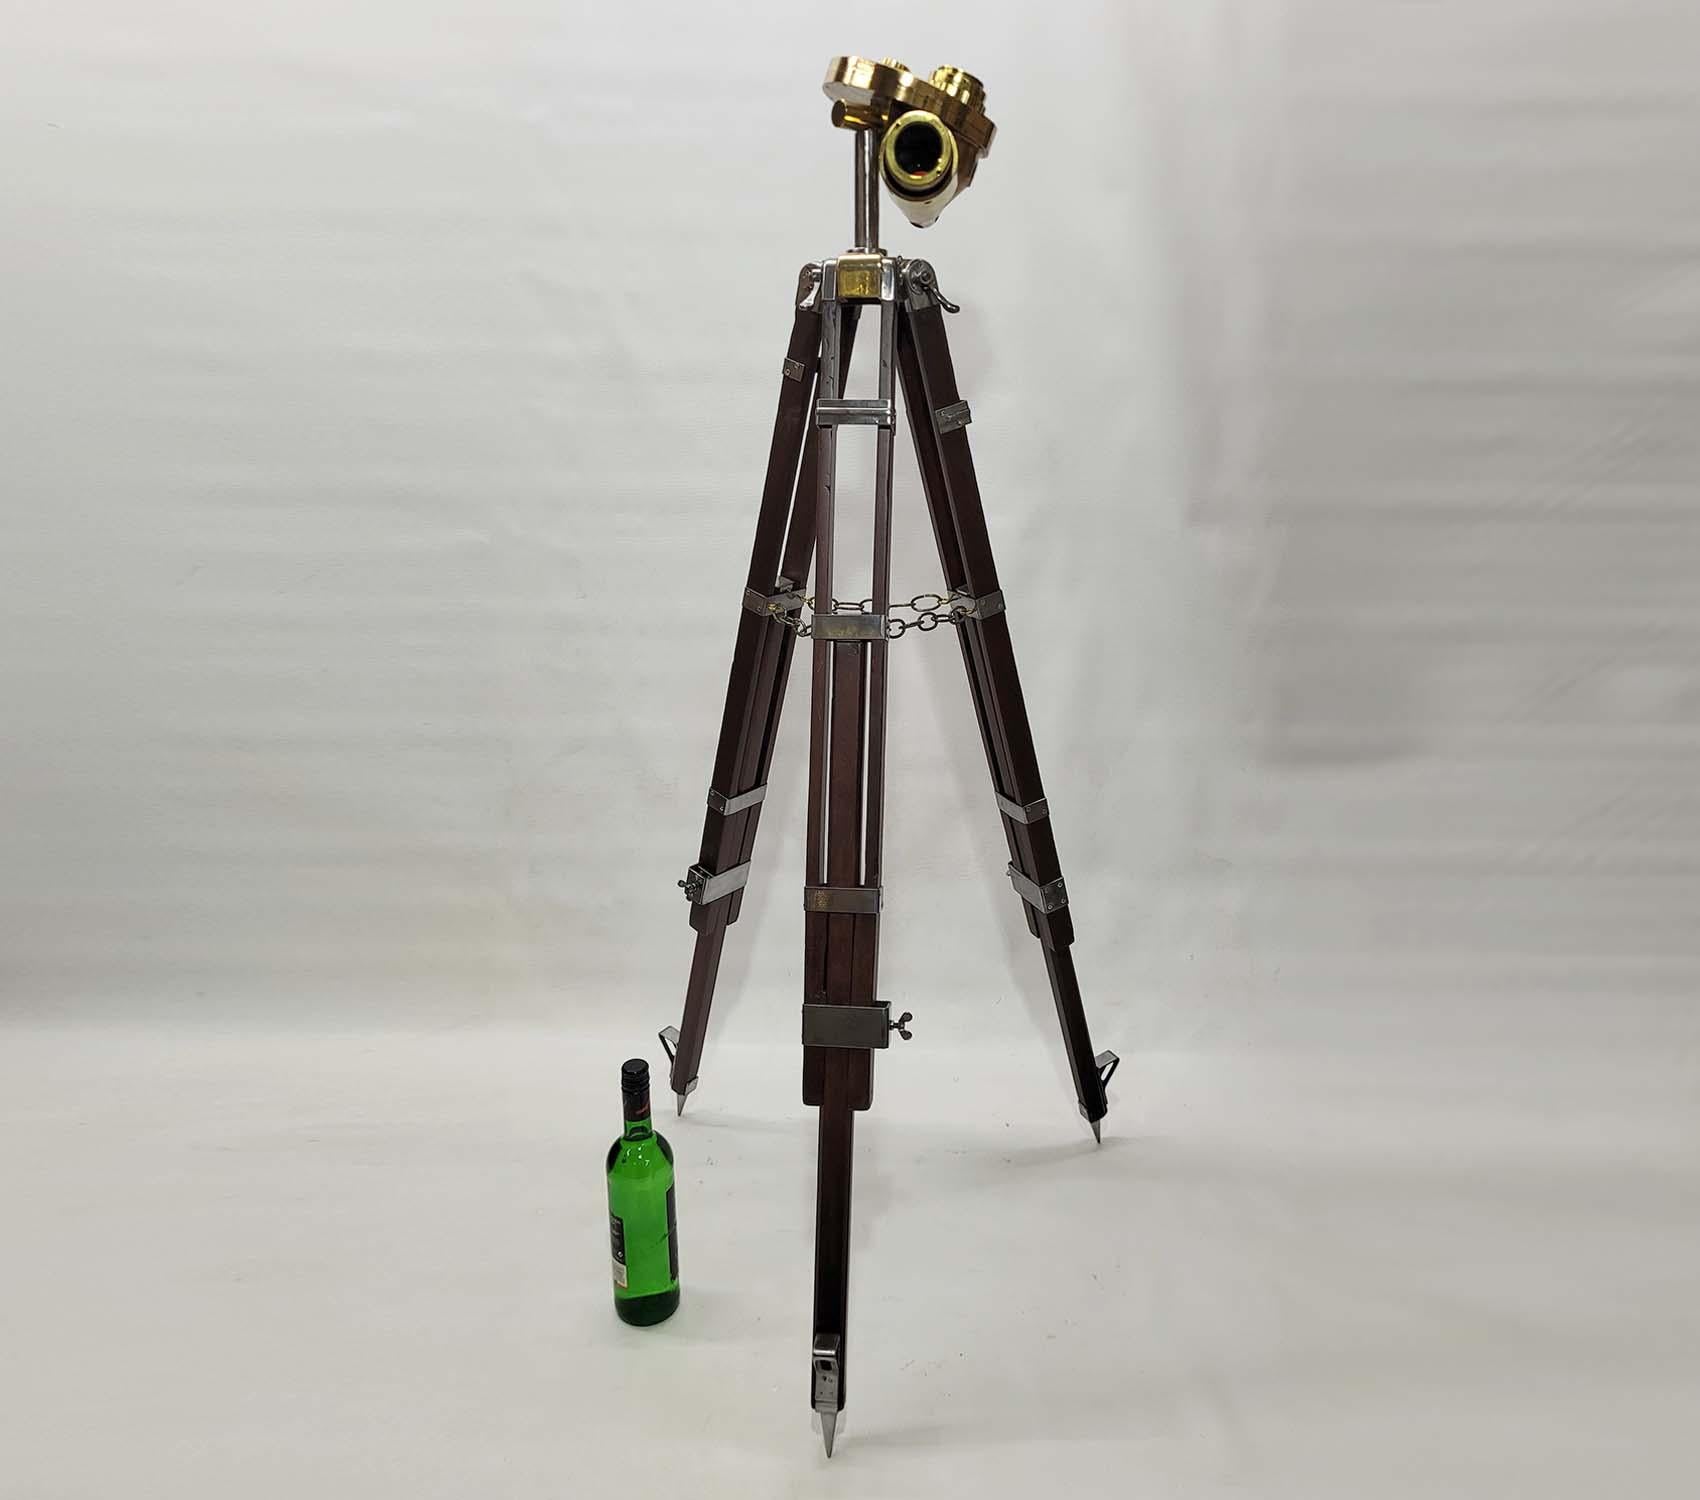 1943 United States Navy Telescope. Used primarily as part of the Mark 16 Aiming System on 50 caliber anti-aircraft gun mounts. Fitted with three sun filters and density knob. The instrument has been retro-fitted to an antique surveyor’s tripod.